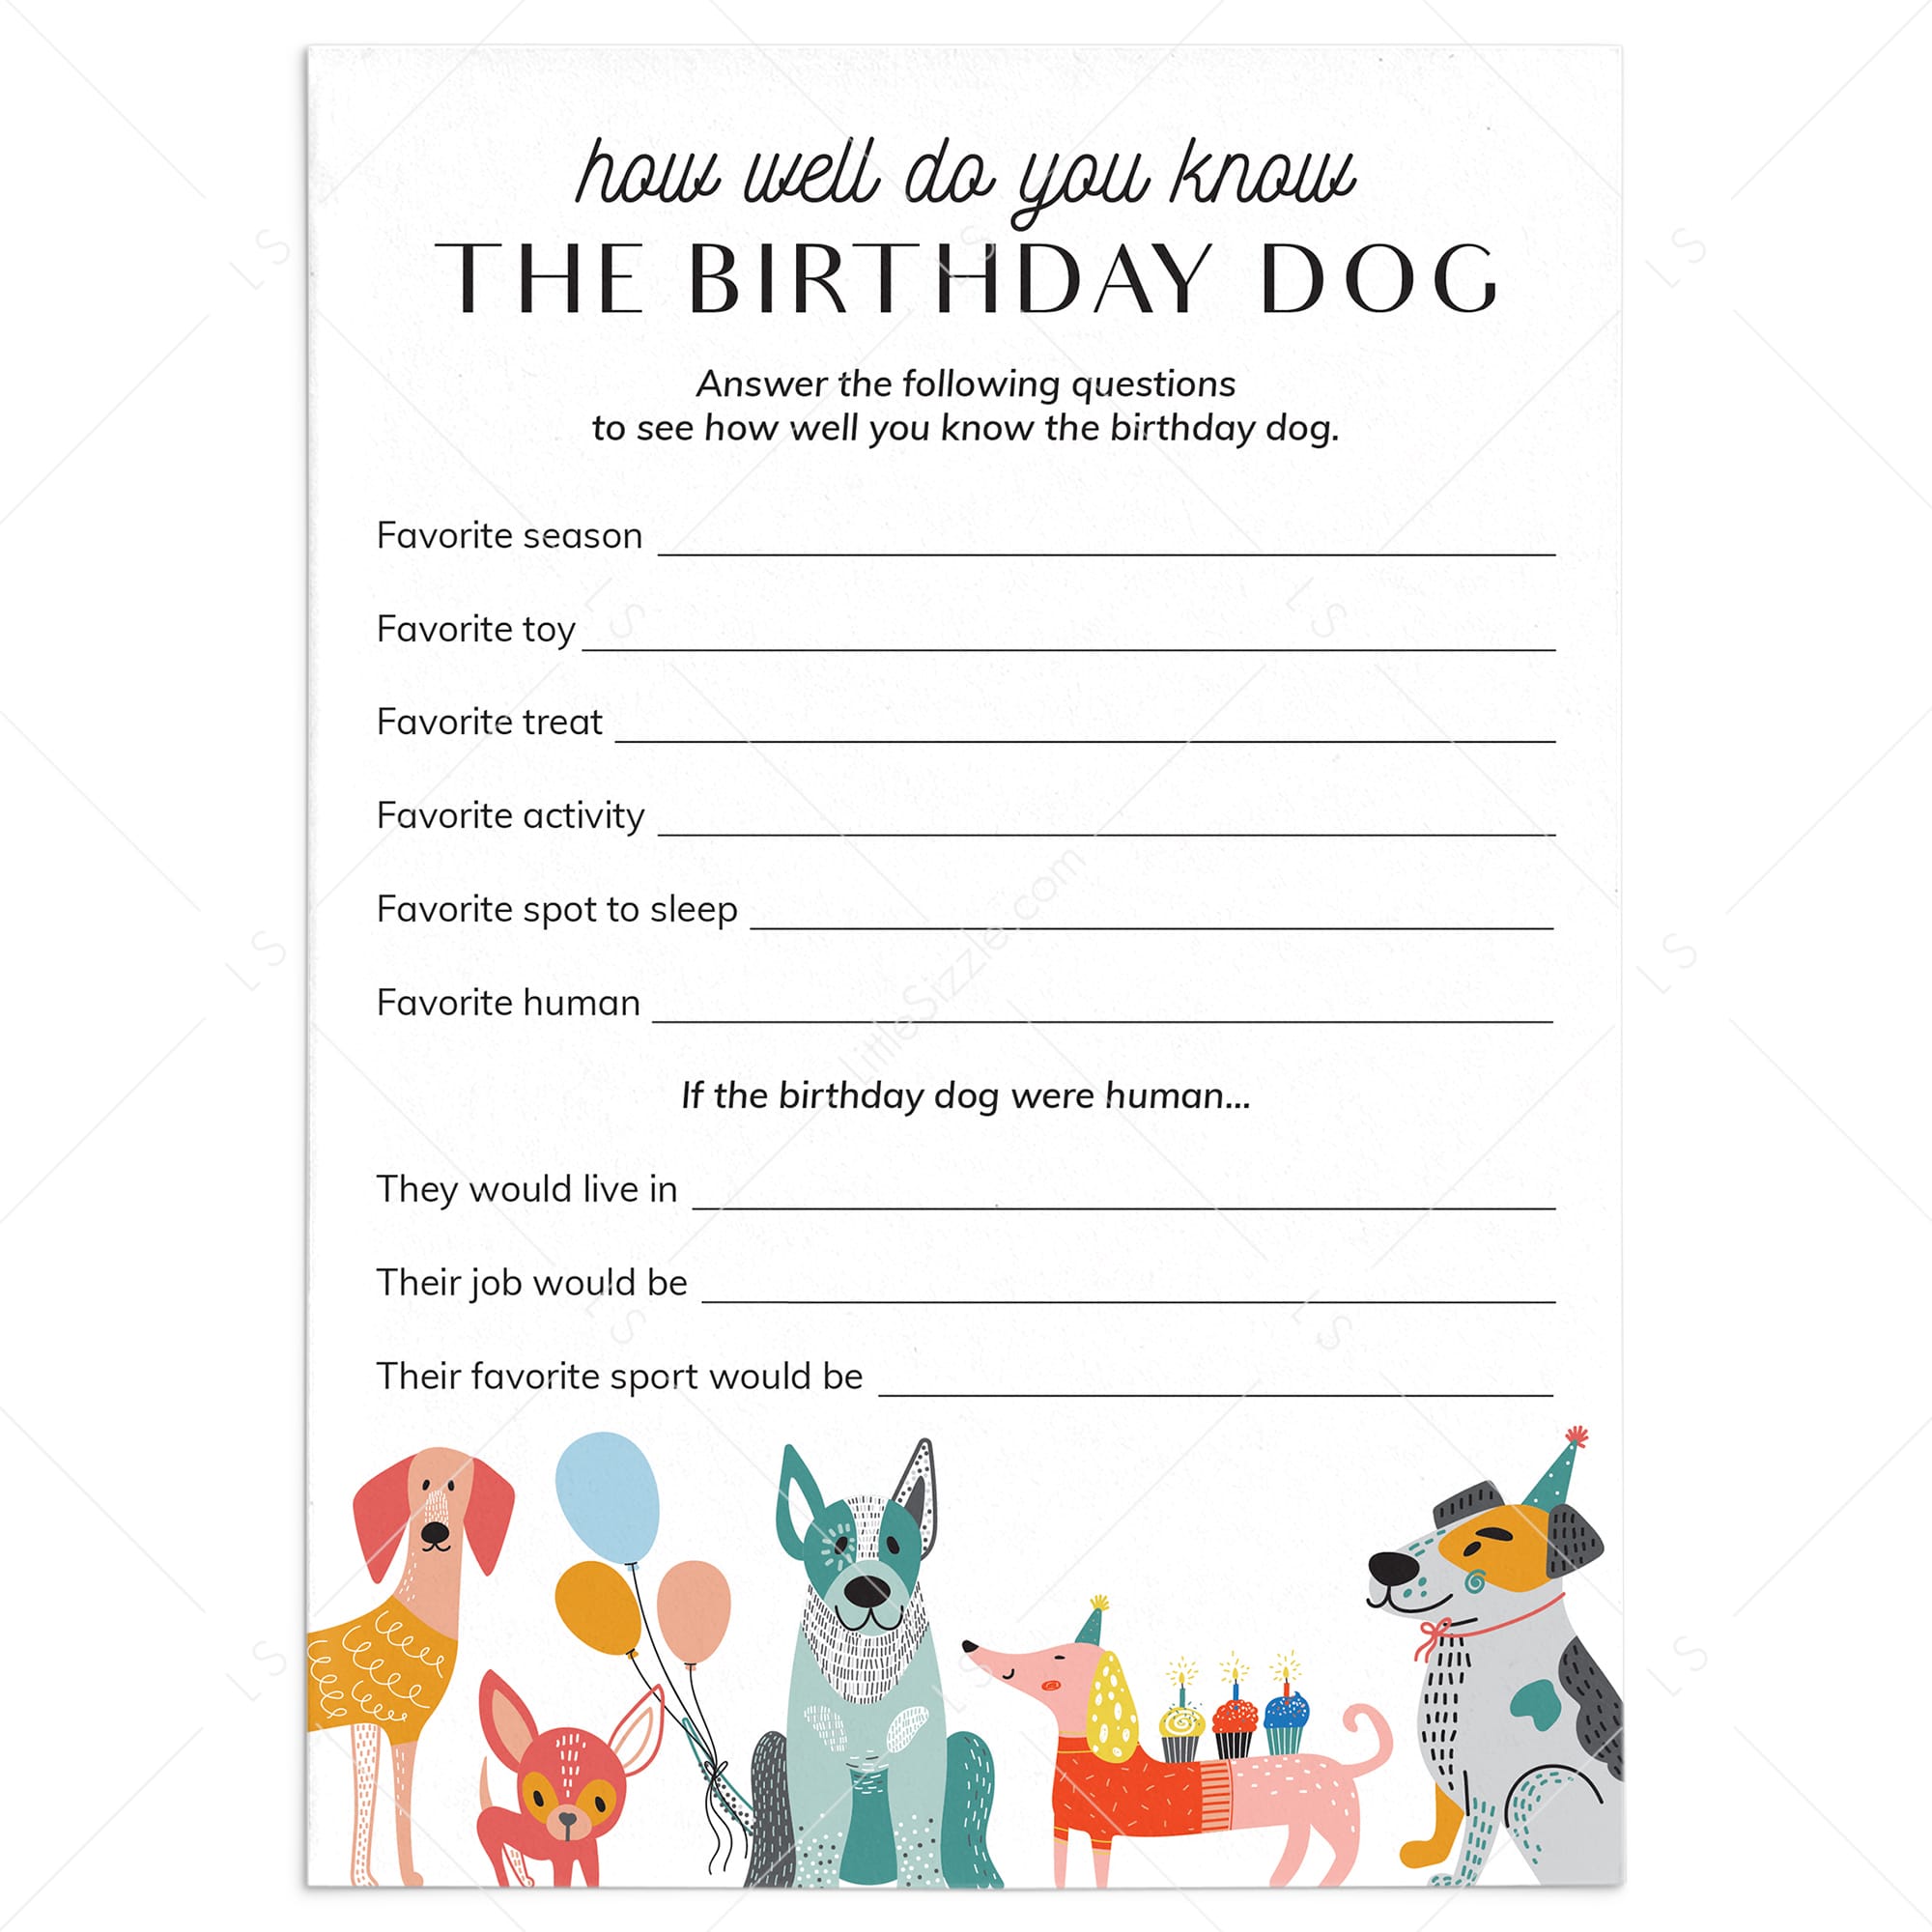 How Well Do You Know The Birthday Dog Game Printable by LittleSizzle